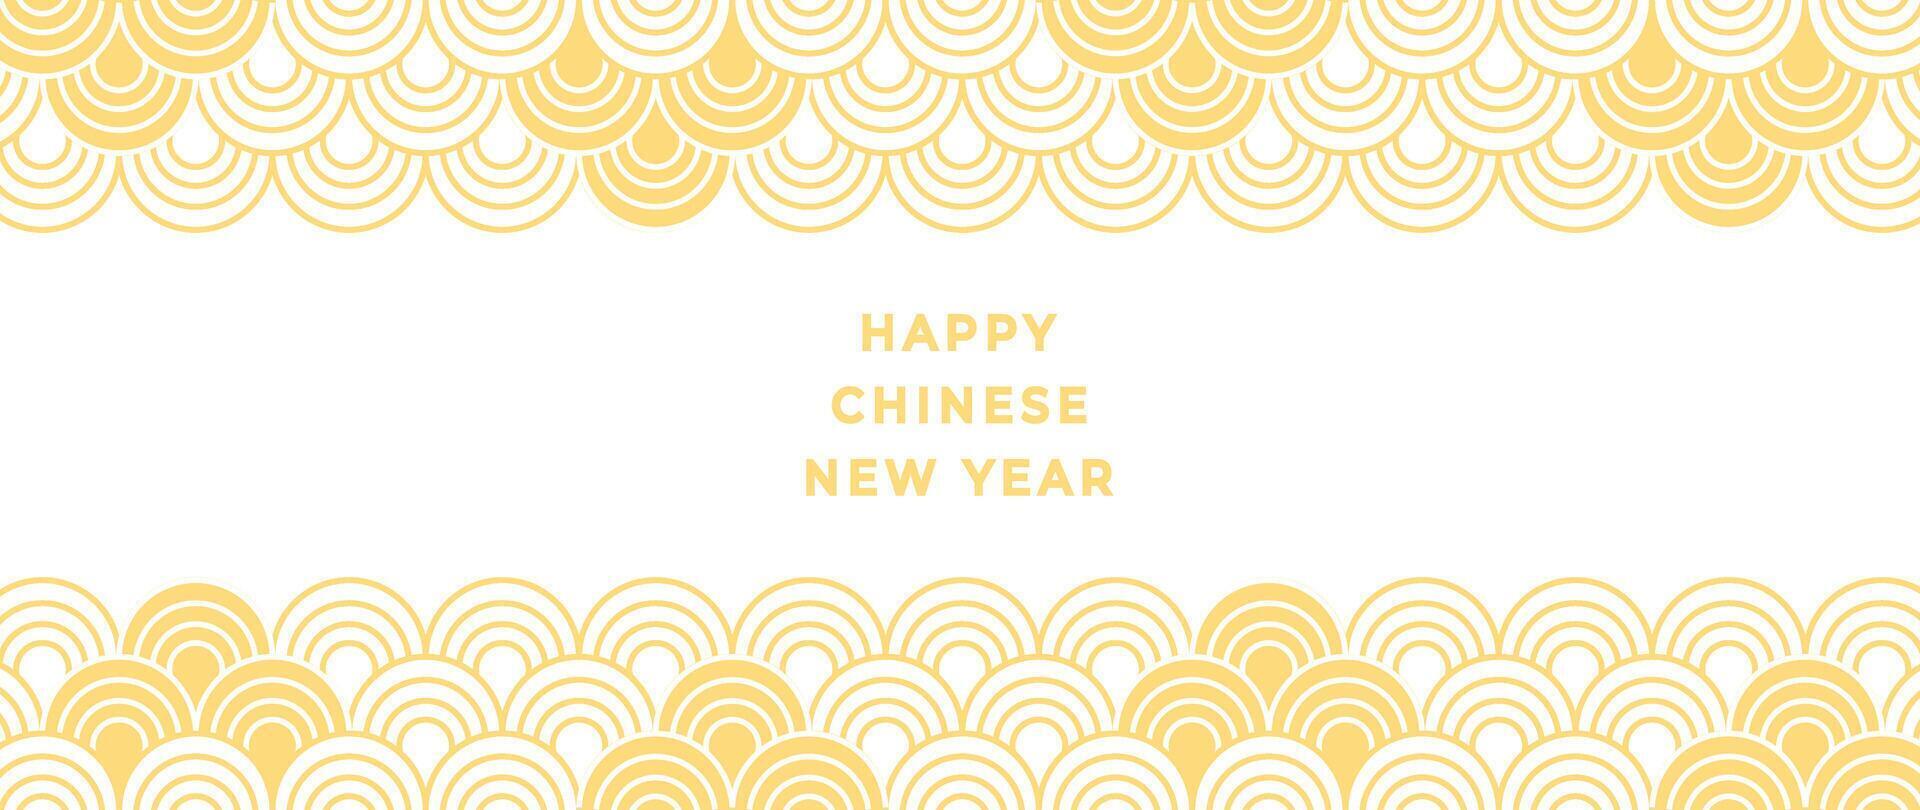 Happy Chinese new year backdrop vector. Wallpaper design with gold chinese pattern on white background. Modern luxury oriental illustration for cover, banner, website, decor, border, frame. vector